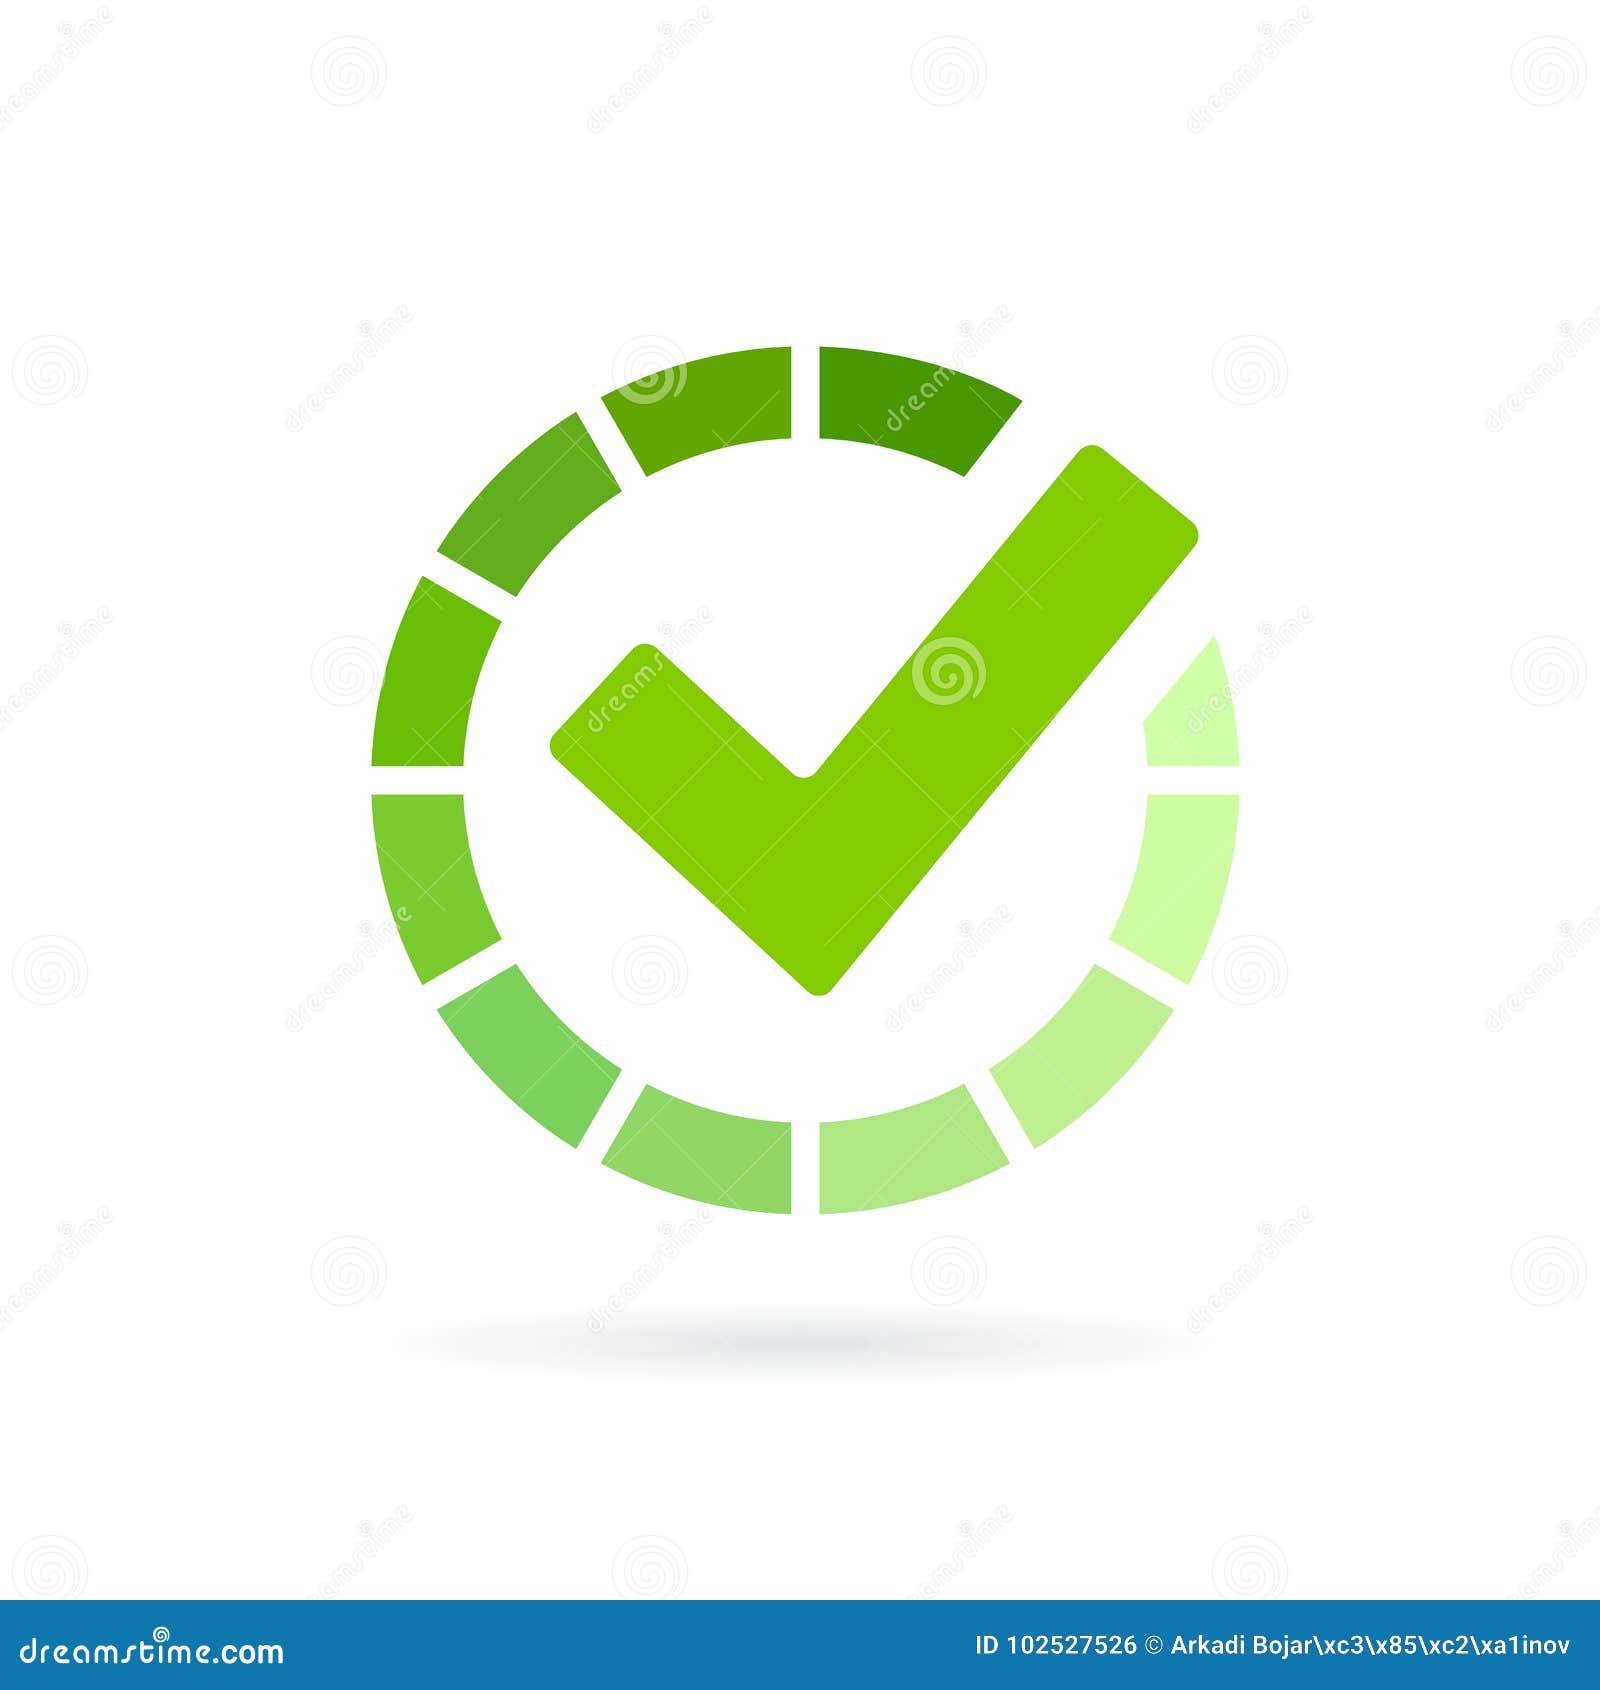 load completed progress bar icon